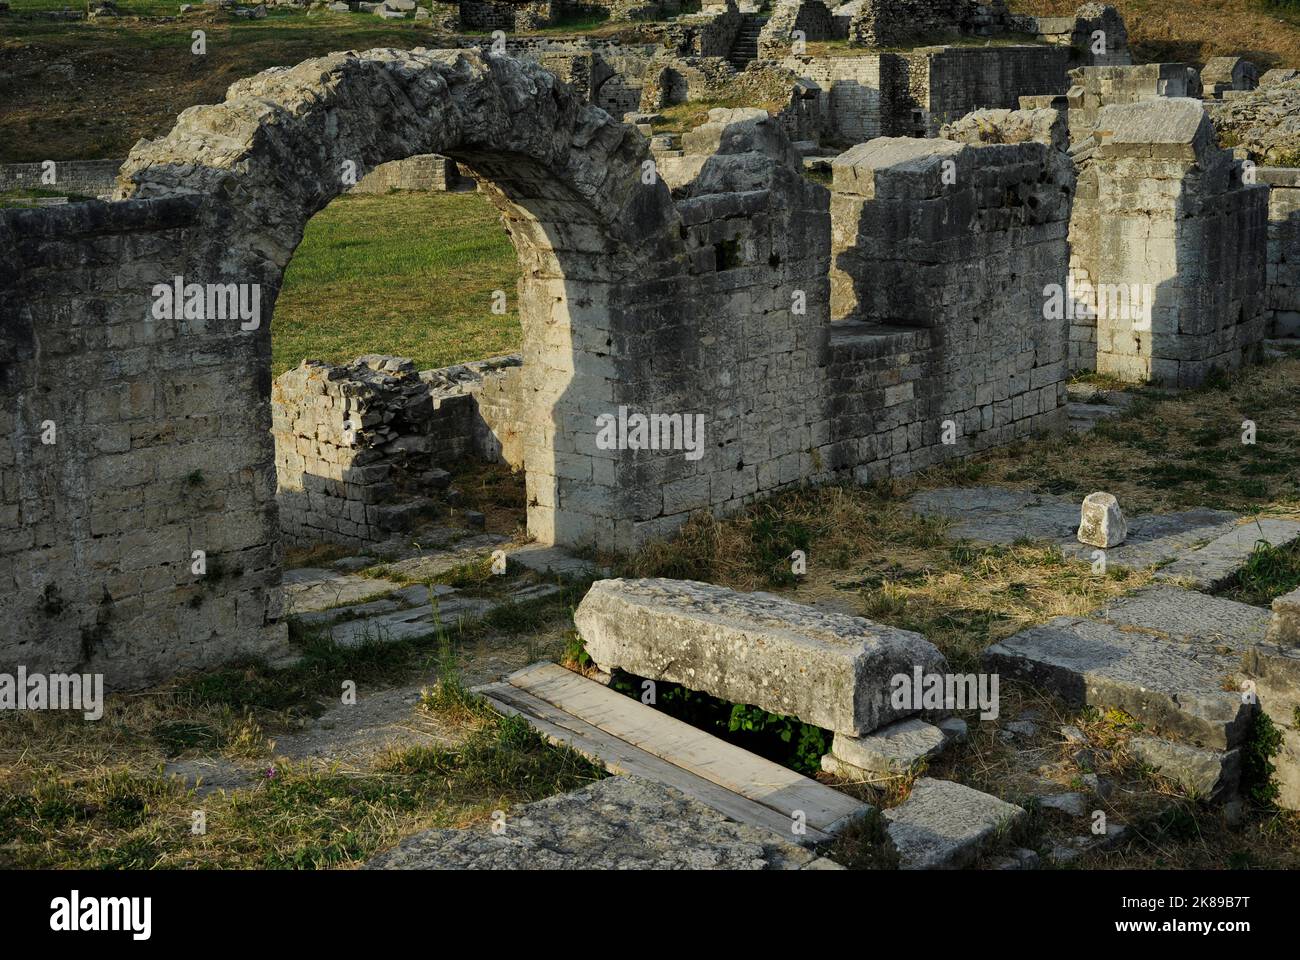 Ruins of the amphitheater. Stock Photo